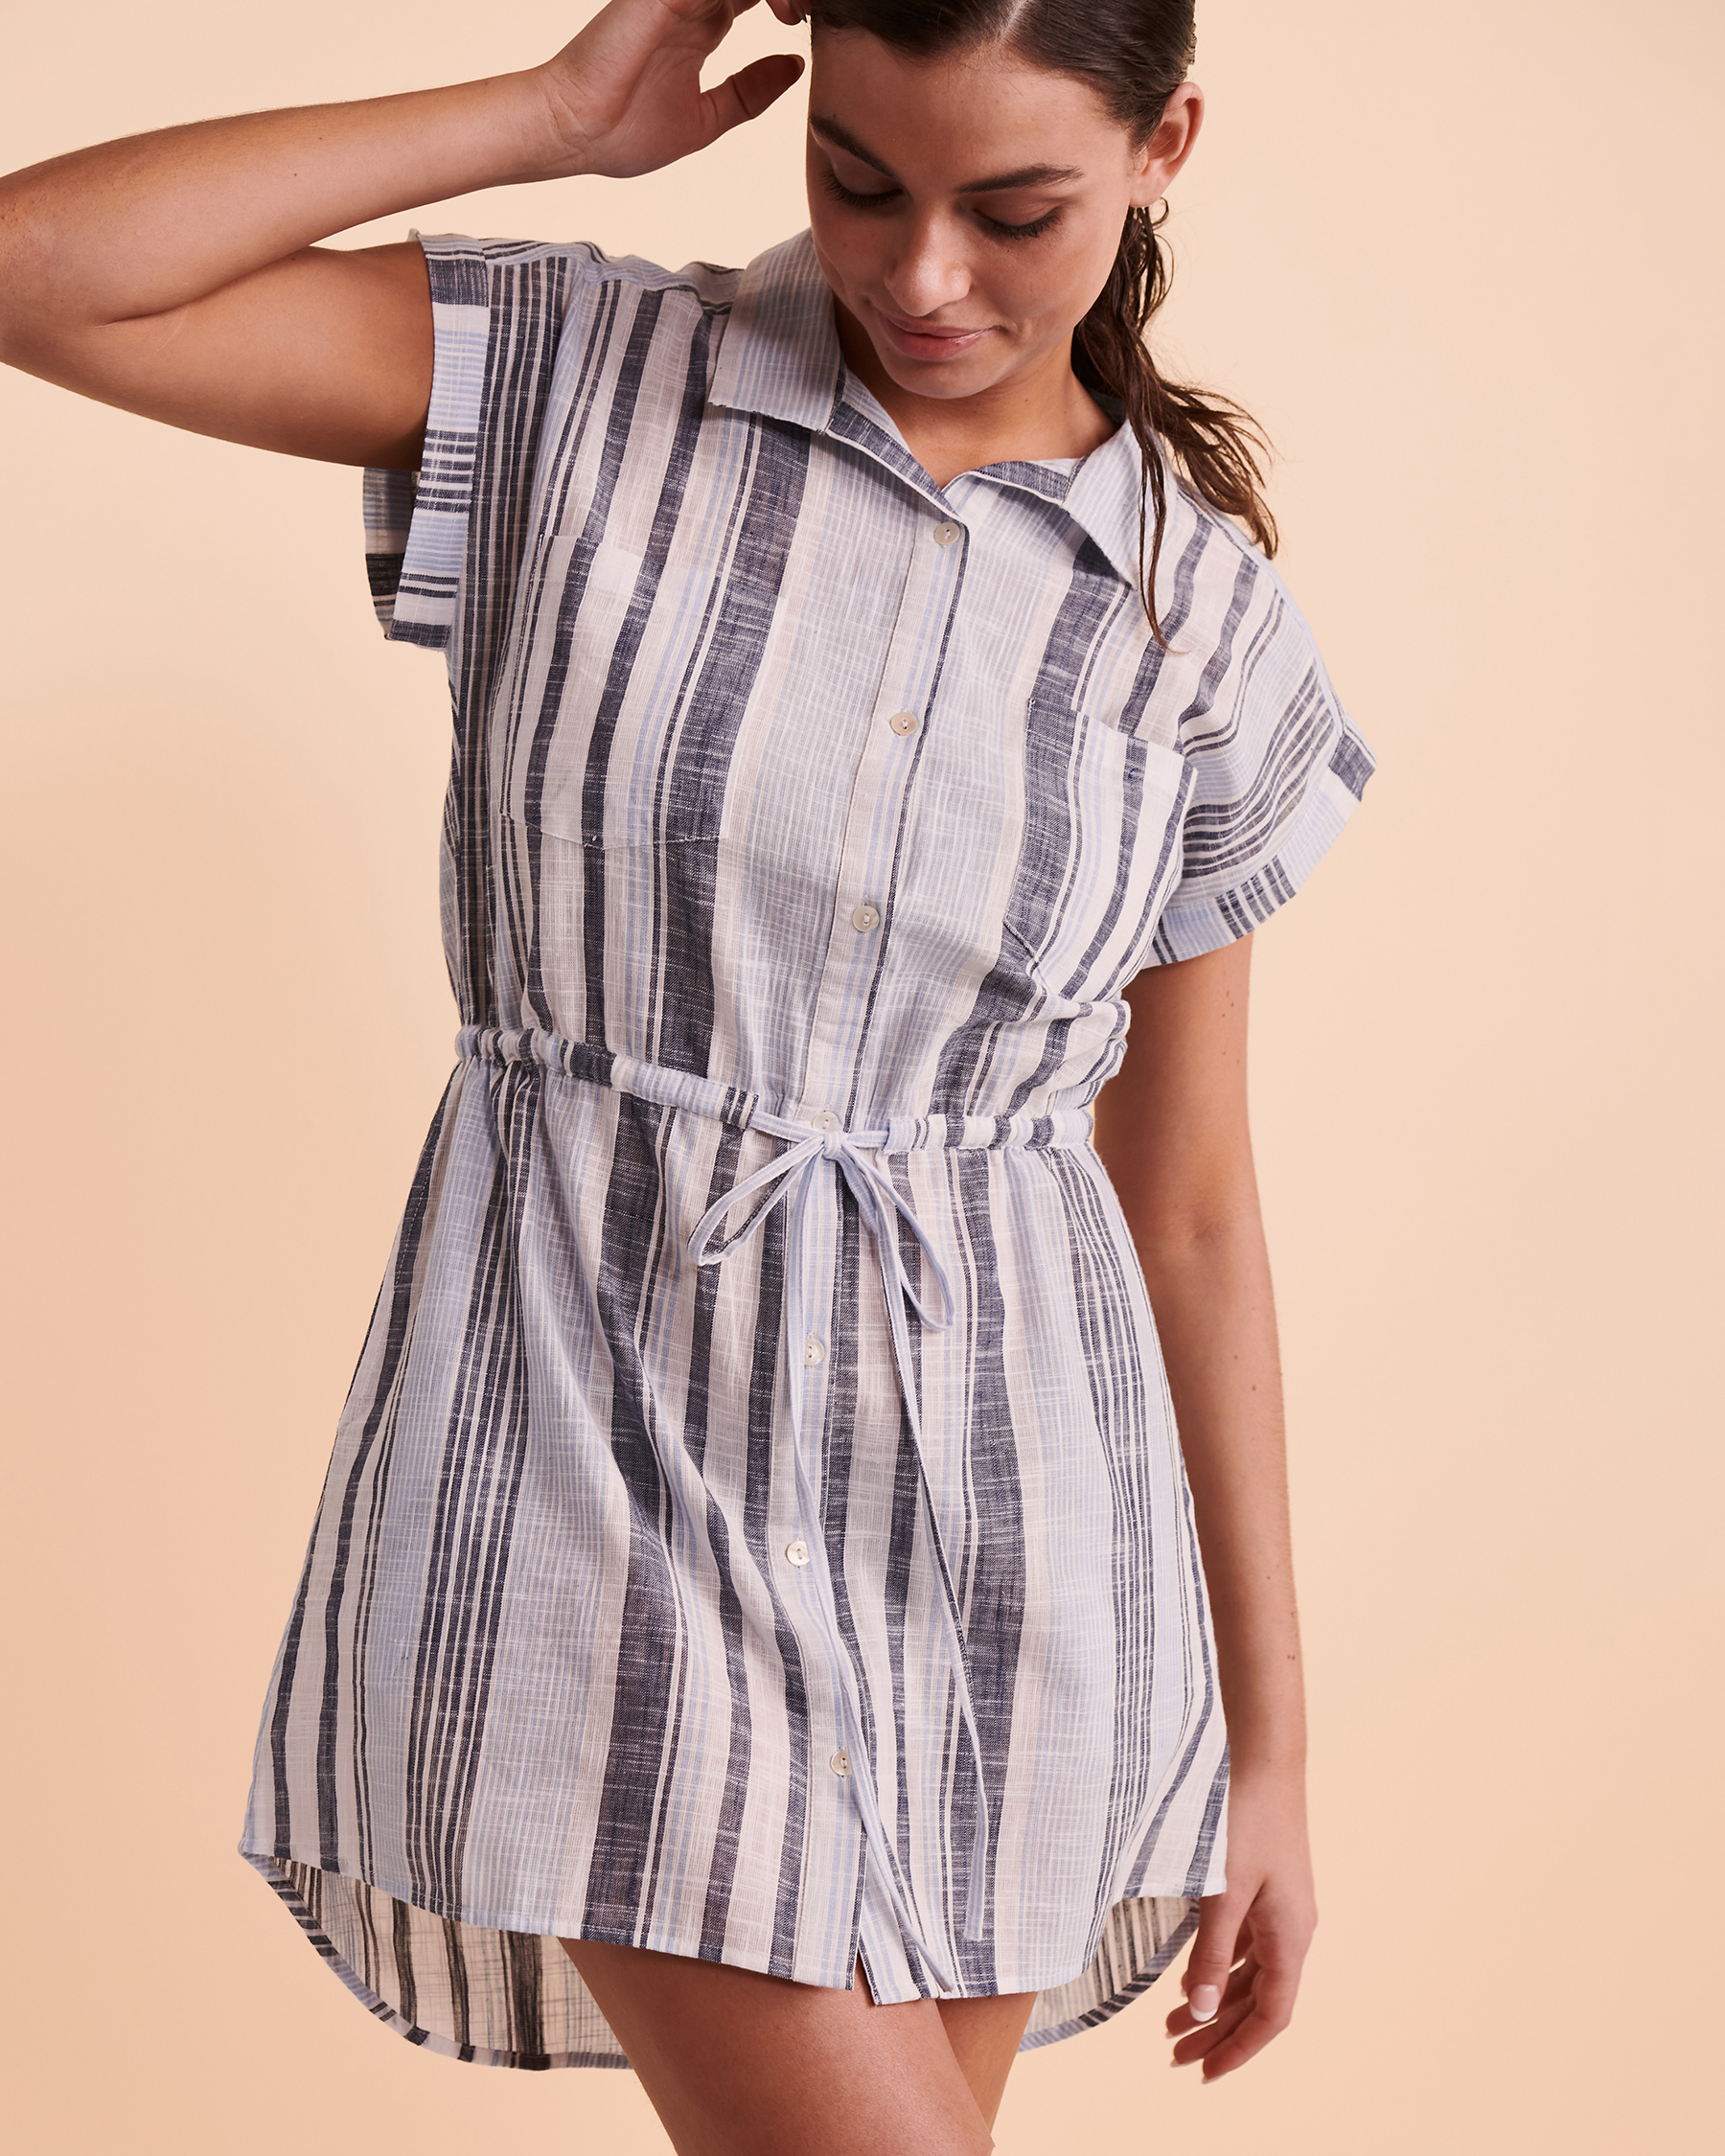 COVER ME Short Sleeve Button-down Dress Multi-stripes 22023250 - View4